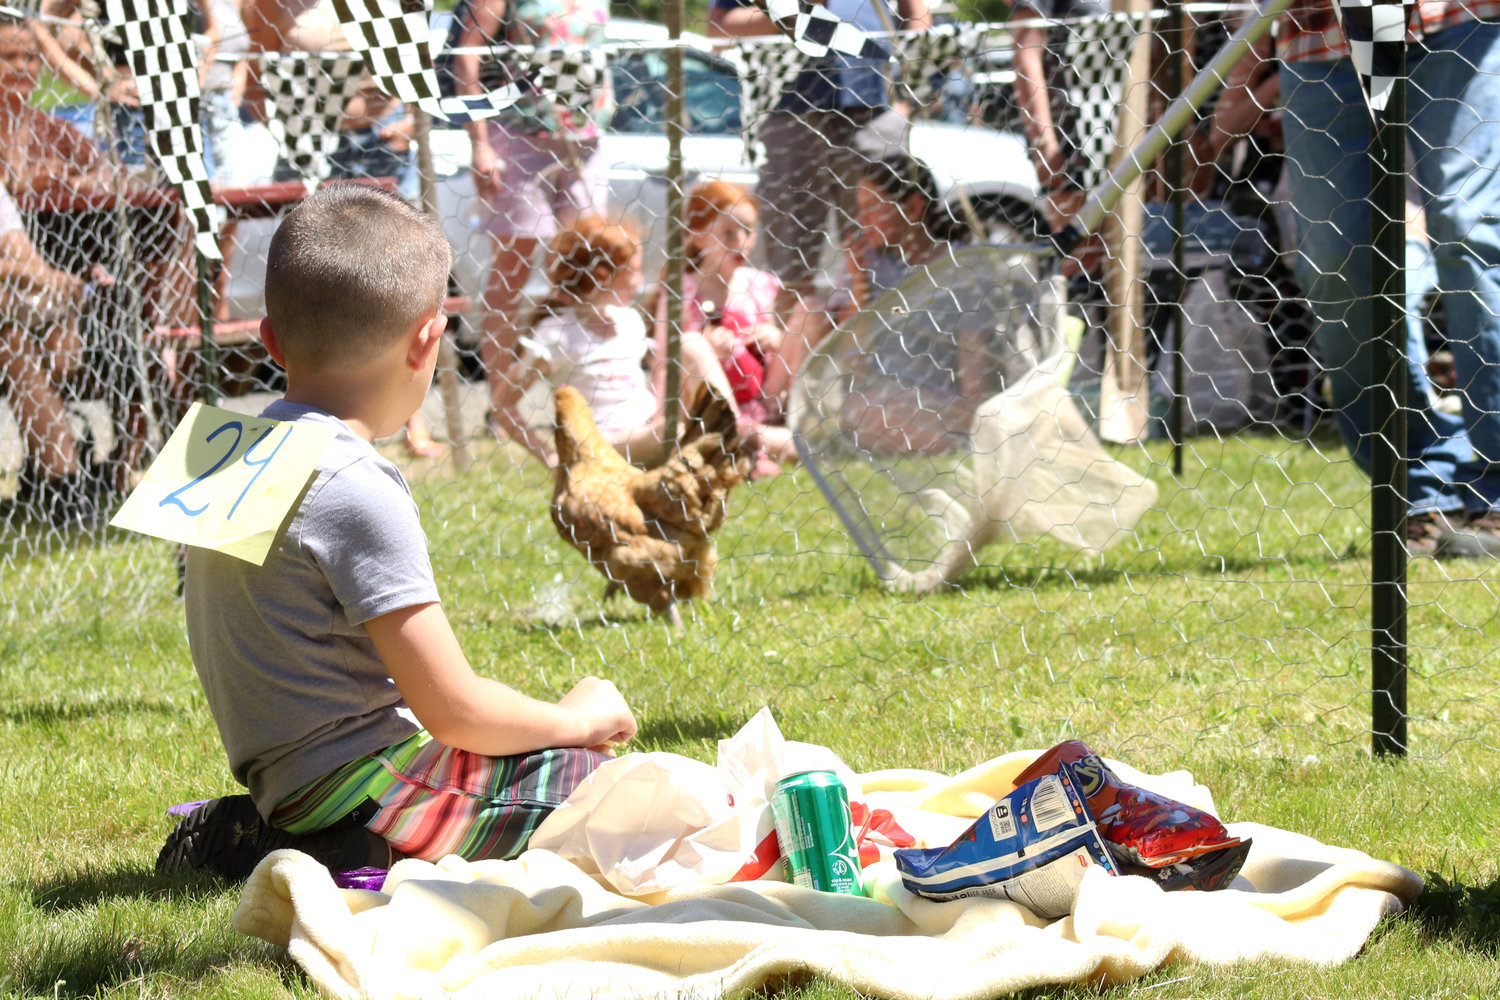 A contestant watches as a chicken is netted during Independence Valley Community Hall’s 42nd Annual Chicken Races in Rochester on Sunday.